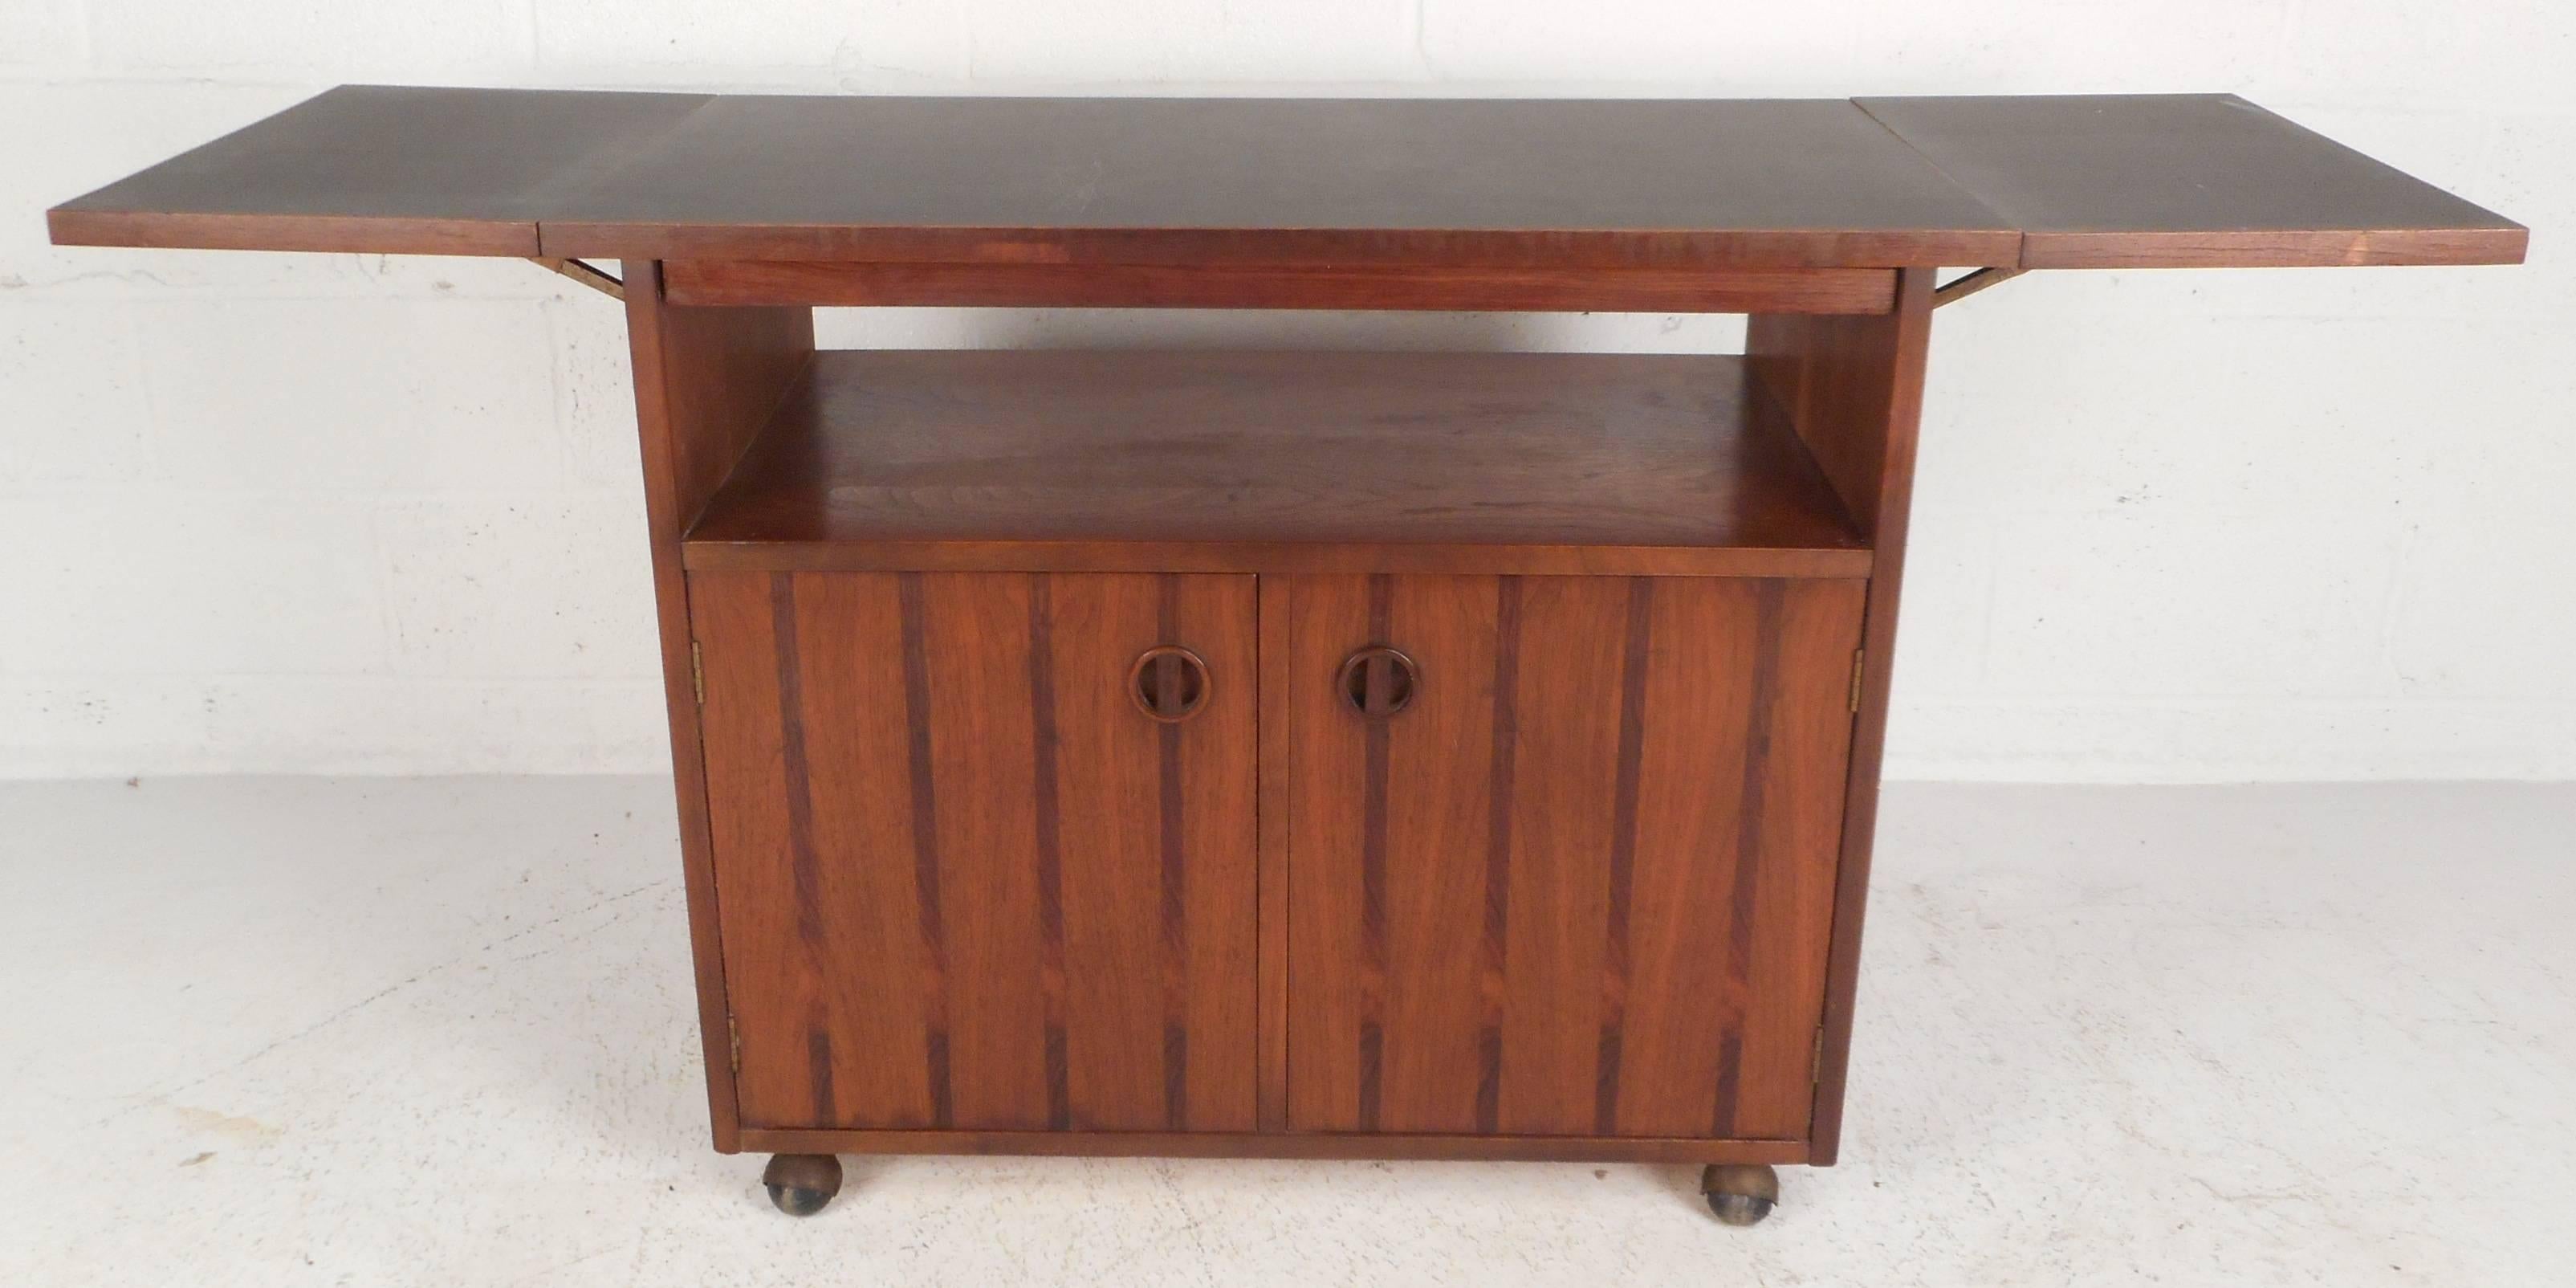 Stunning vintage modern walnut bar cart with unique rosewood striped accents, recessed circular pulls, and a pull-out Formica top tray. The sleek design has a drop-leaf Formica top that opens up to 60.25